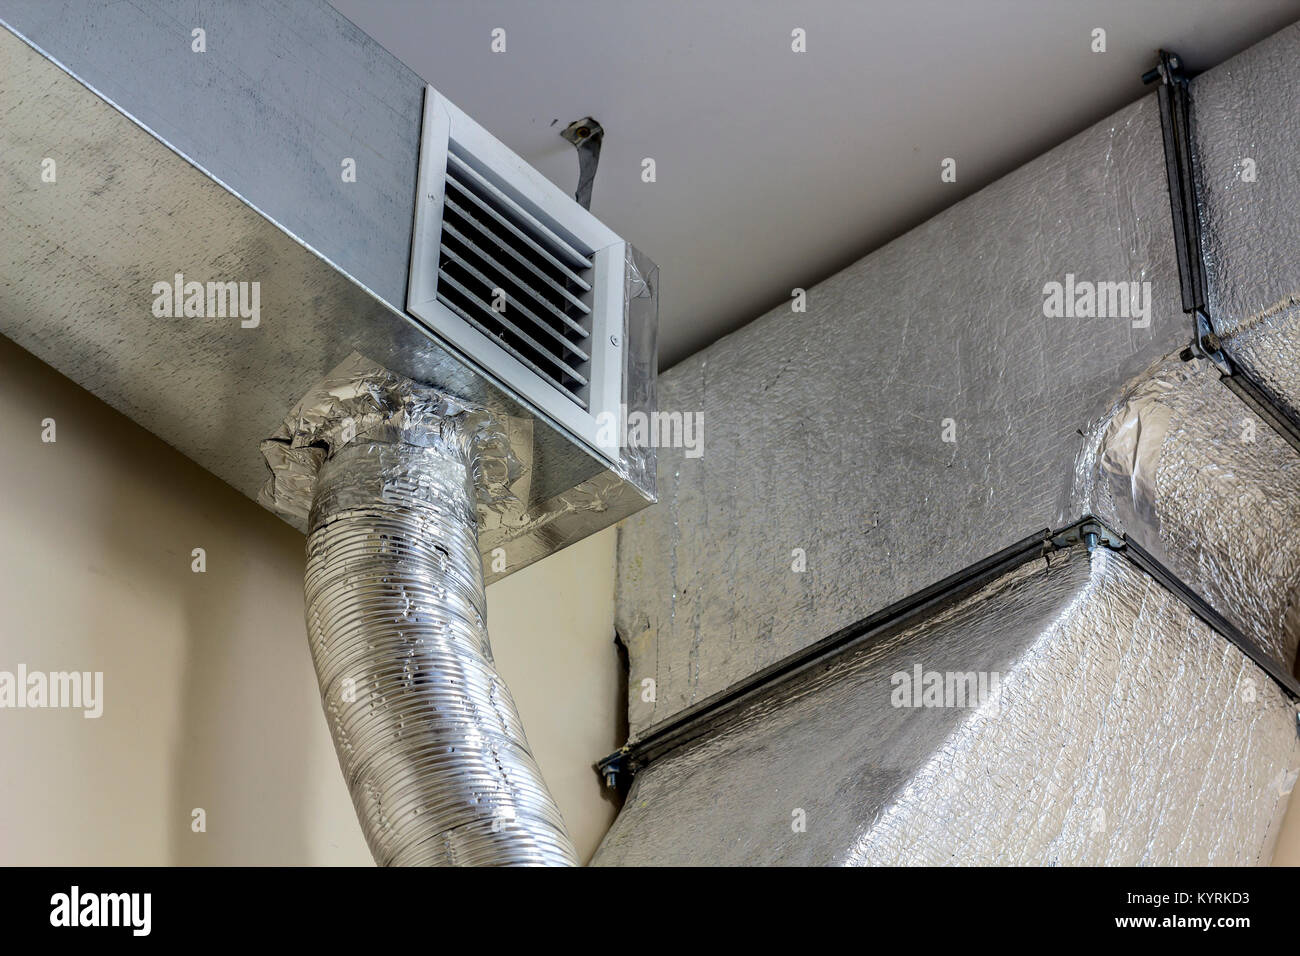 Industrial air duct ventilation equipment and pipe systems installed on  industrial building ceiling Stock Photo - Alamy